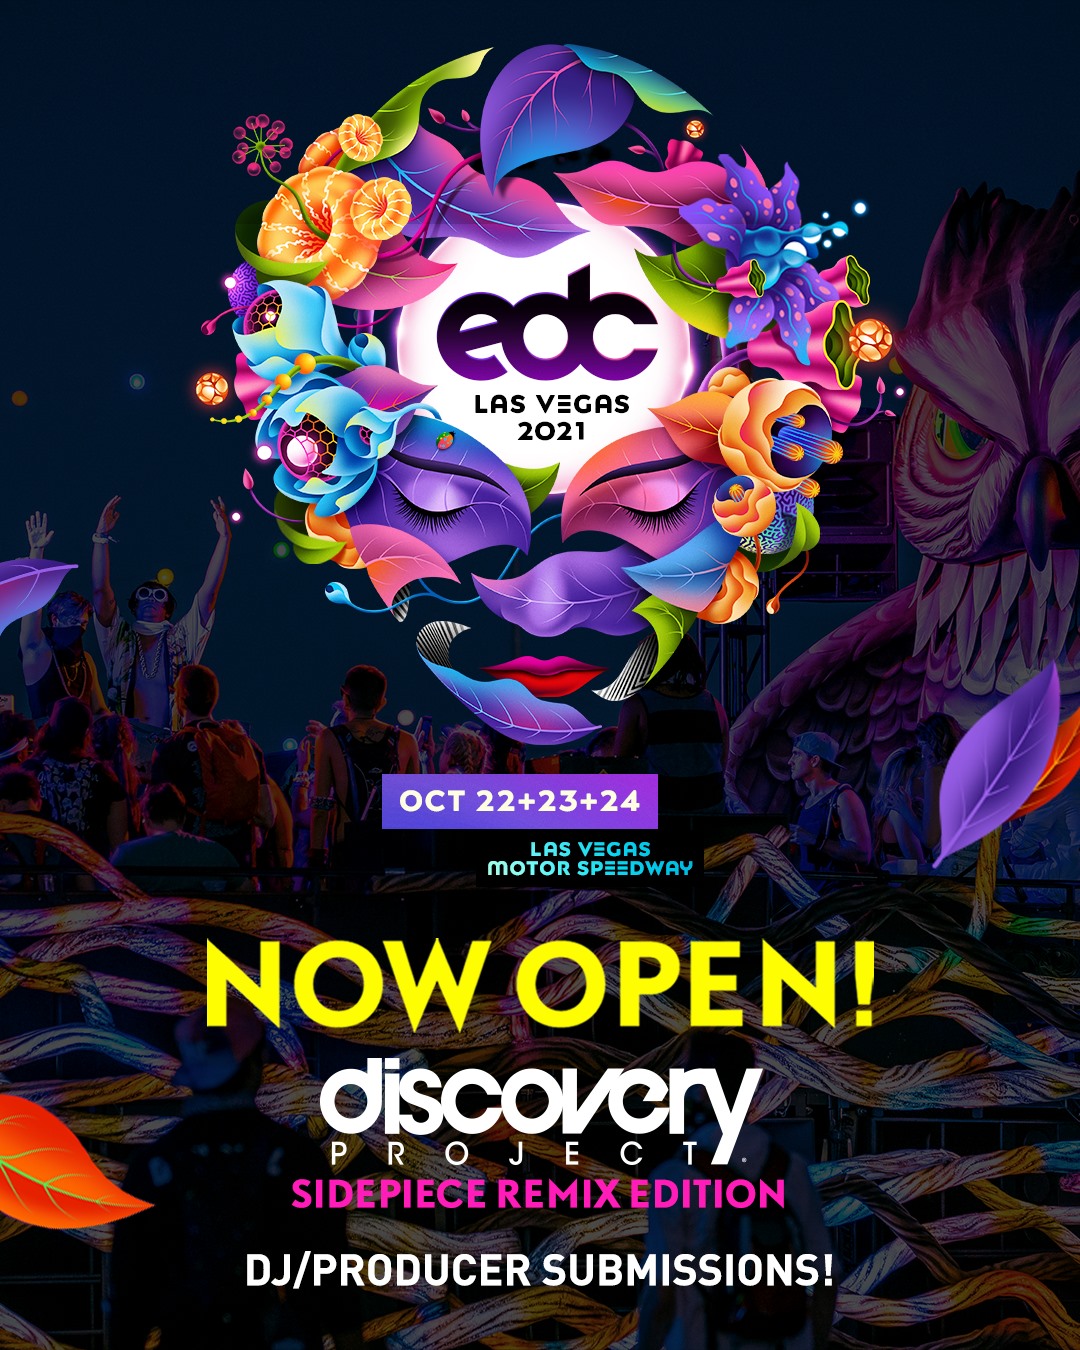 Want to Perform at EDC? Give It Your Shot With The “Discovery Project”